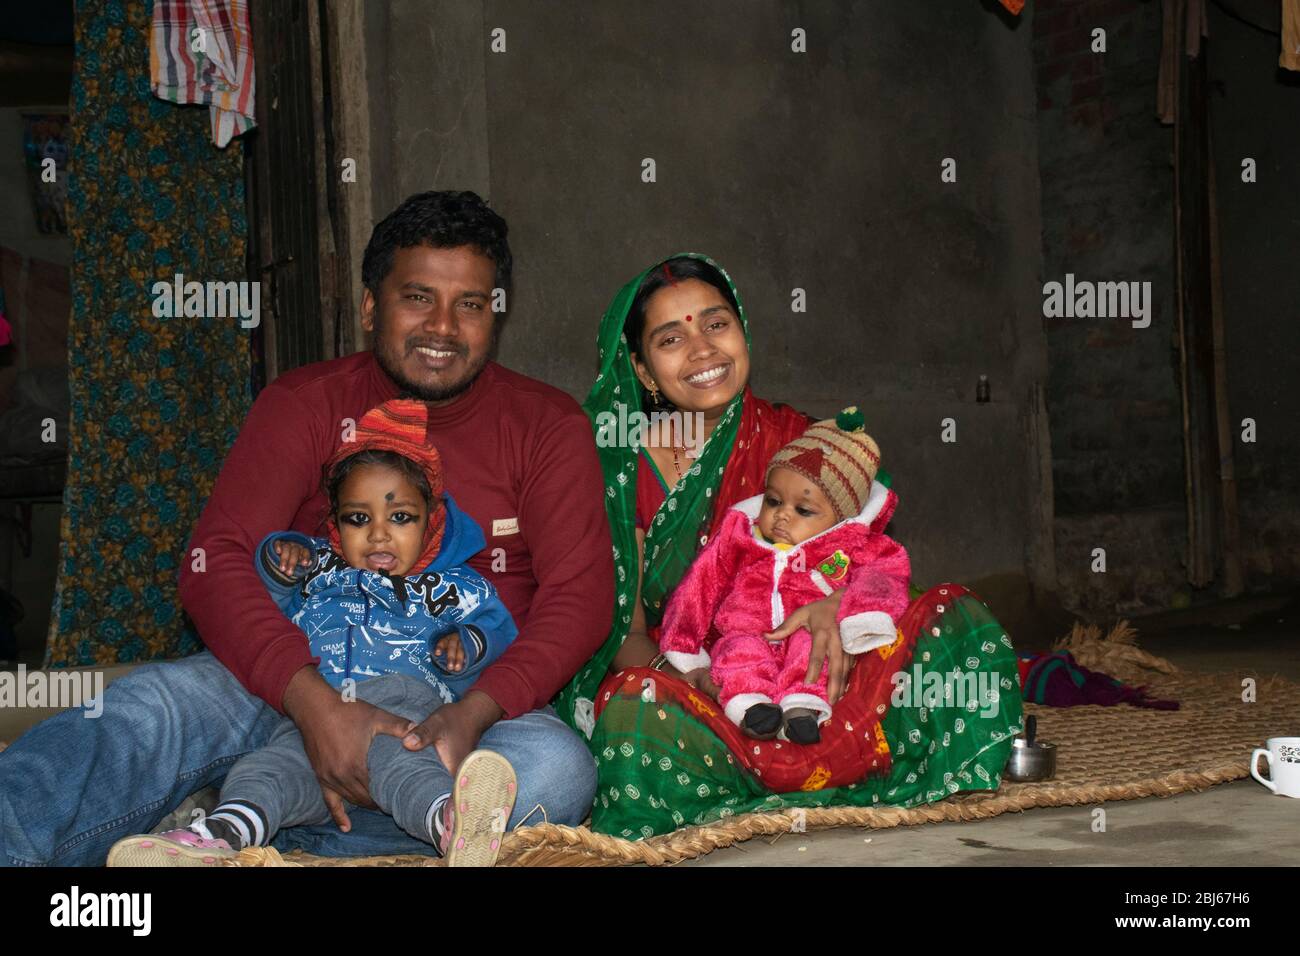 Portrait of Indian rural family smiling Stock Photo